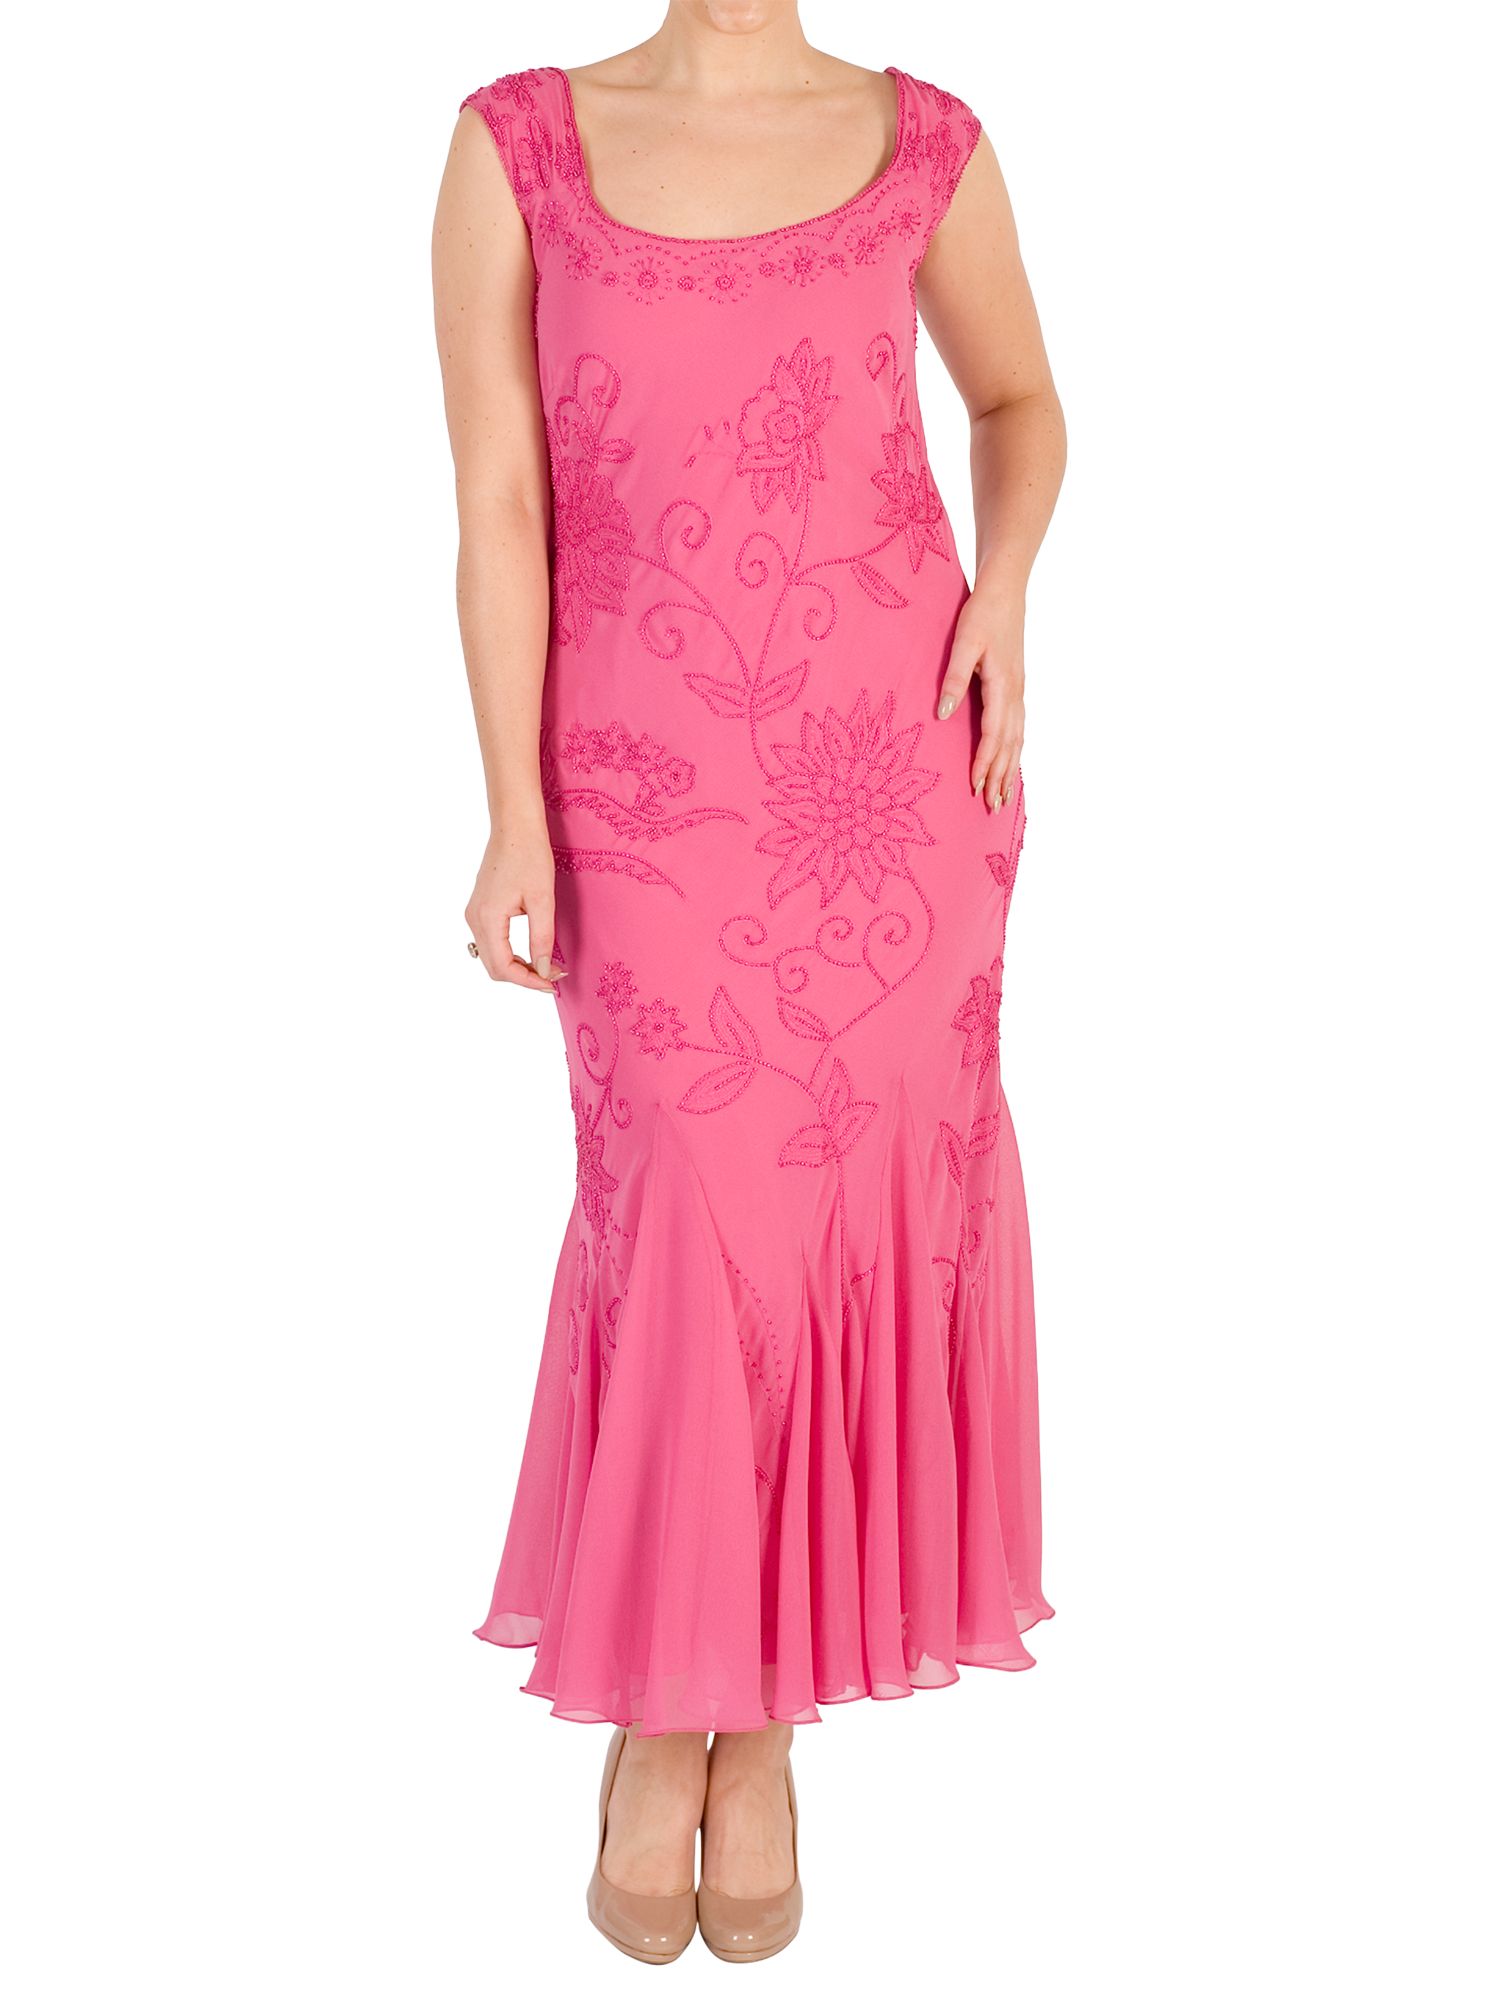 Chesca Embroidered Beaded Dress, Rose Pink